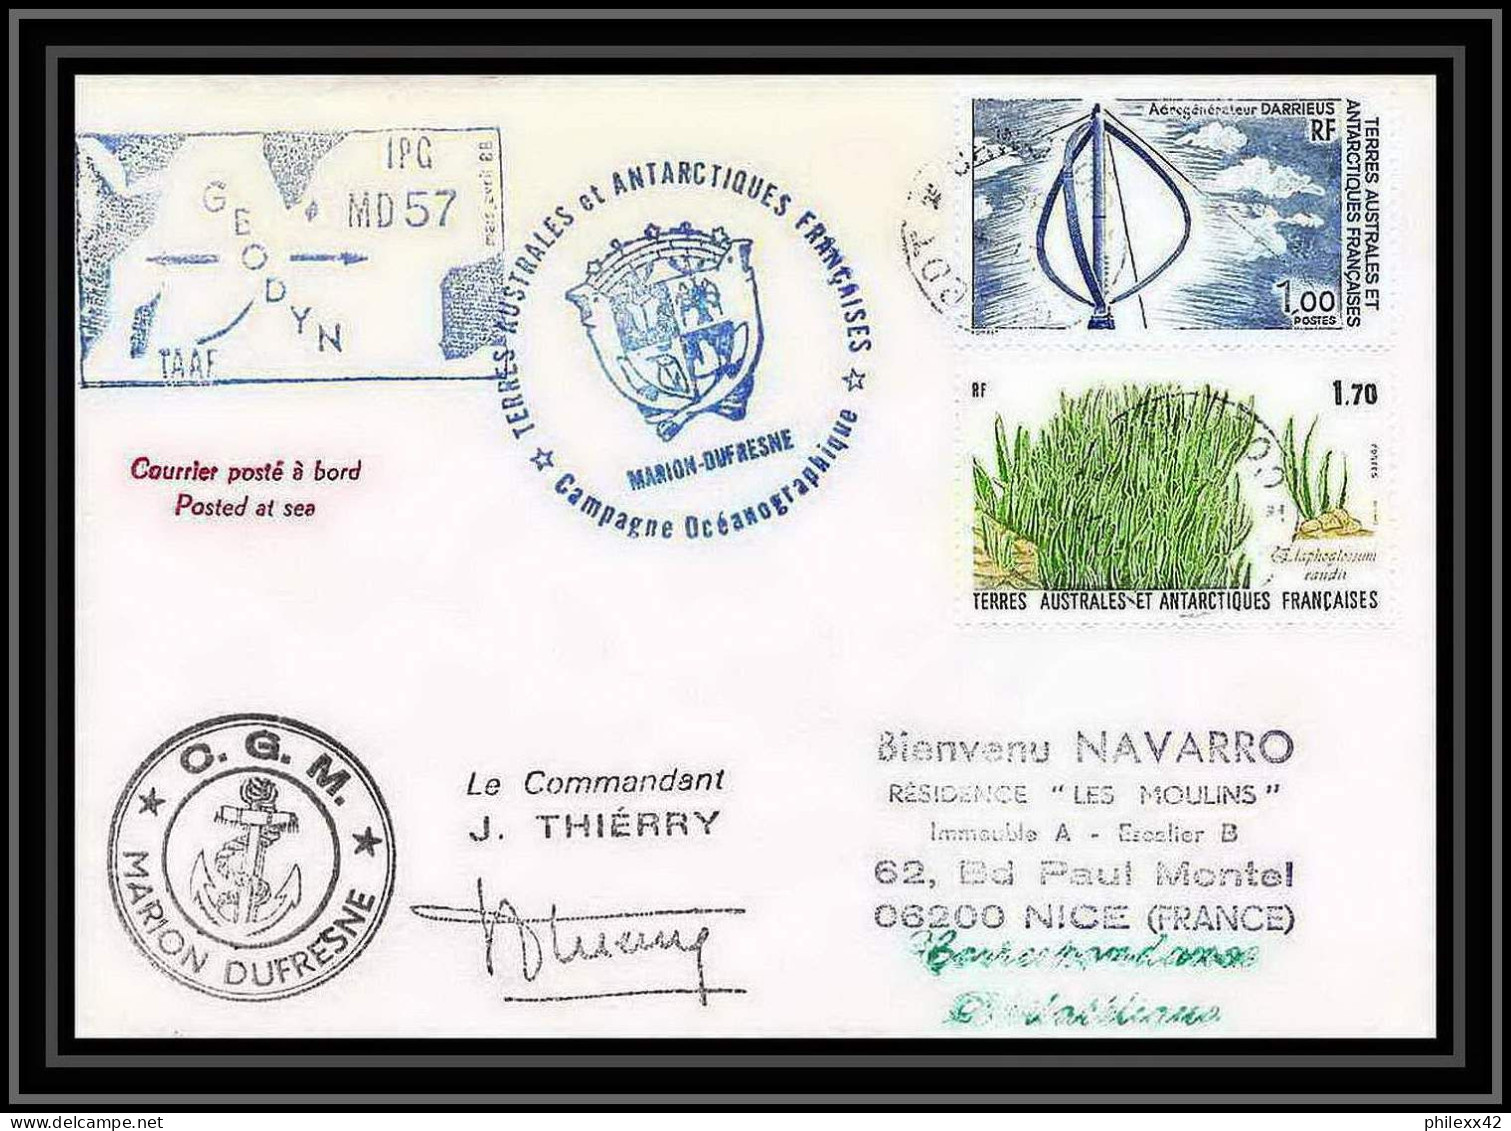 1555 Geodyn Md 57 Marion Dufresne 21/4/1988 Signé Signed Thierry TAAF Antarctic Terres Australes Lettre (cover) - Antarctische Expedities